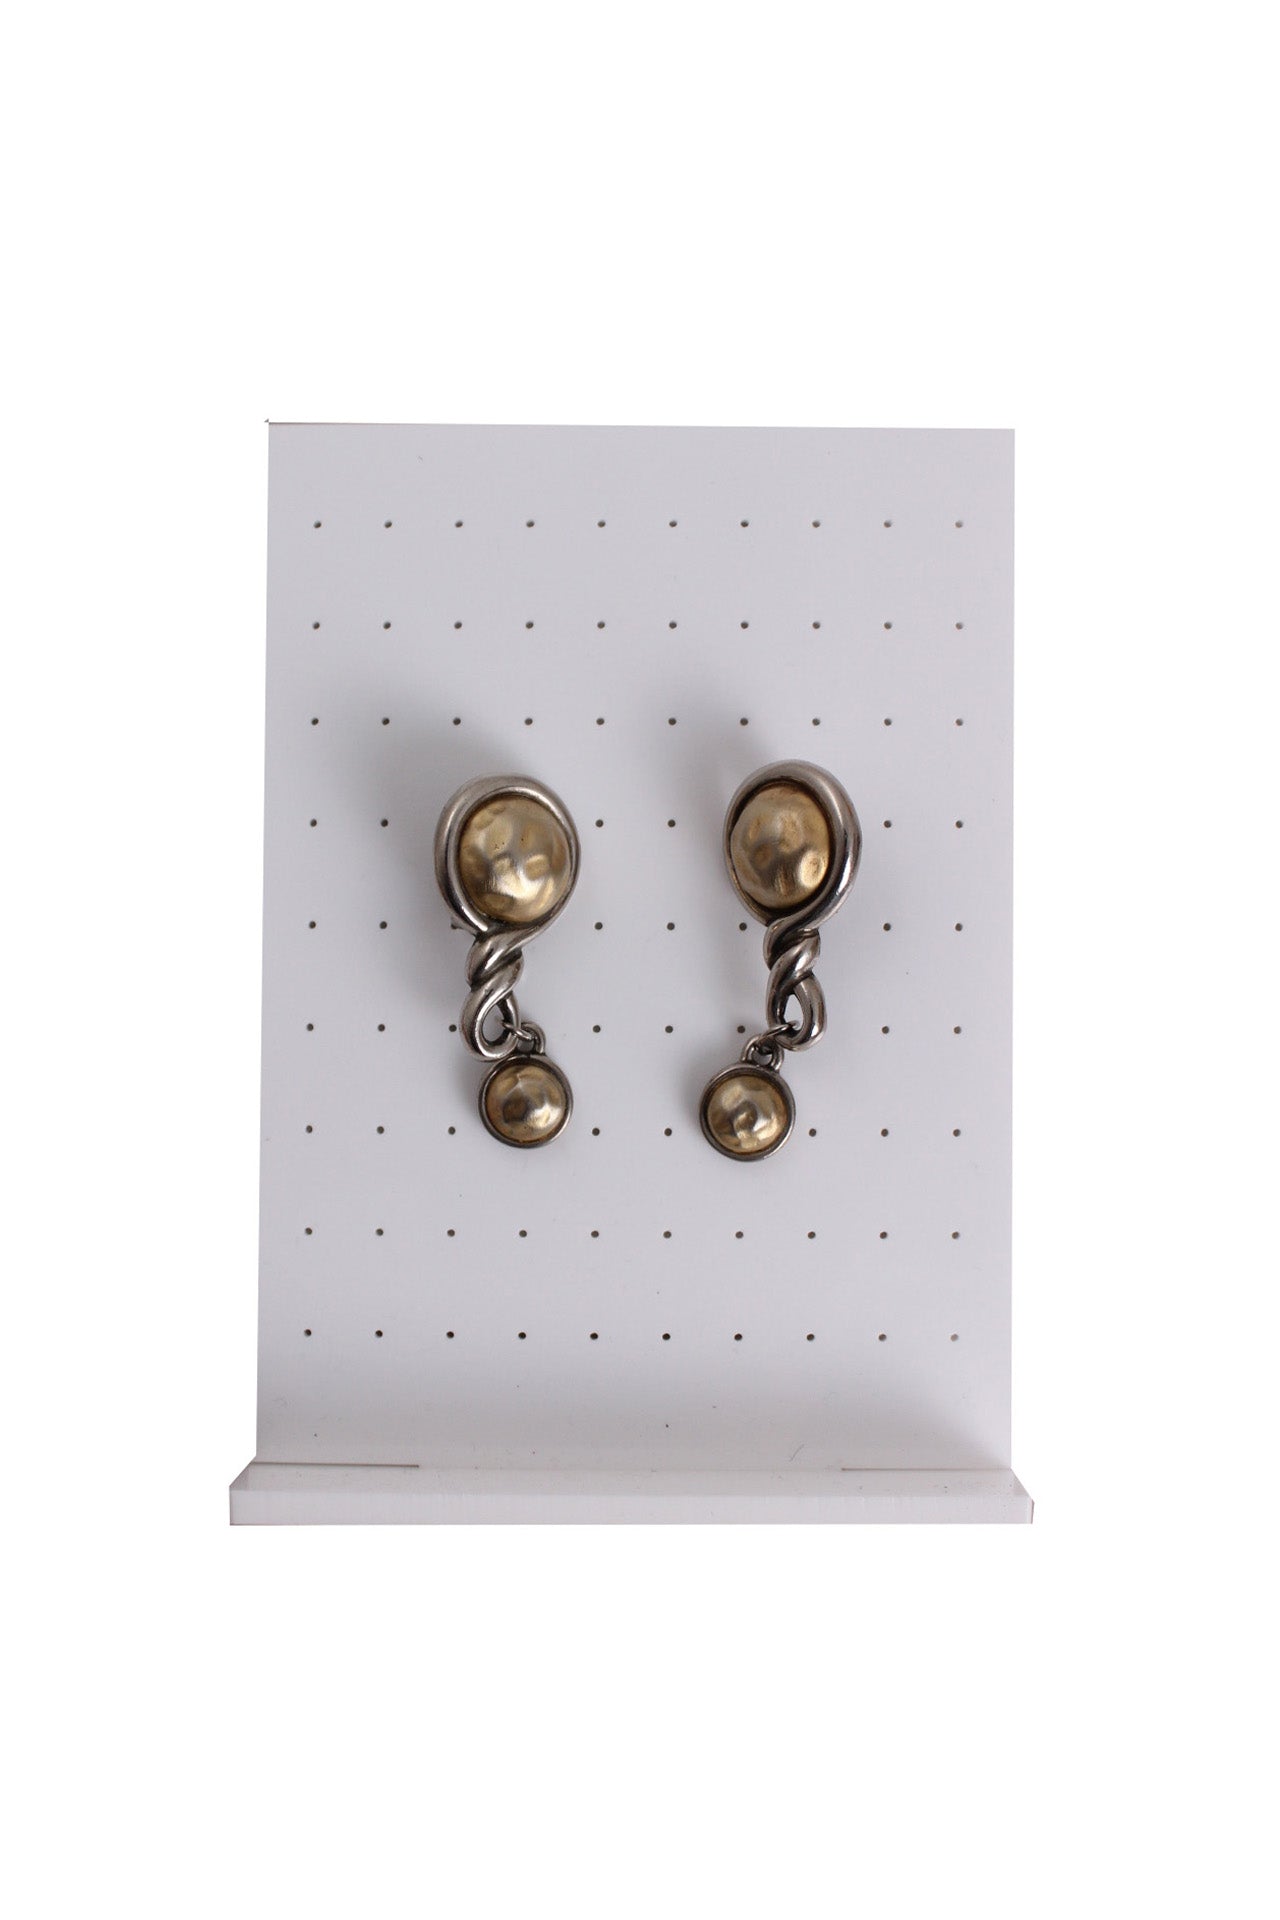 aged silver and gold toned chunky knot-like earrings staged against earring stand.